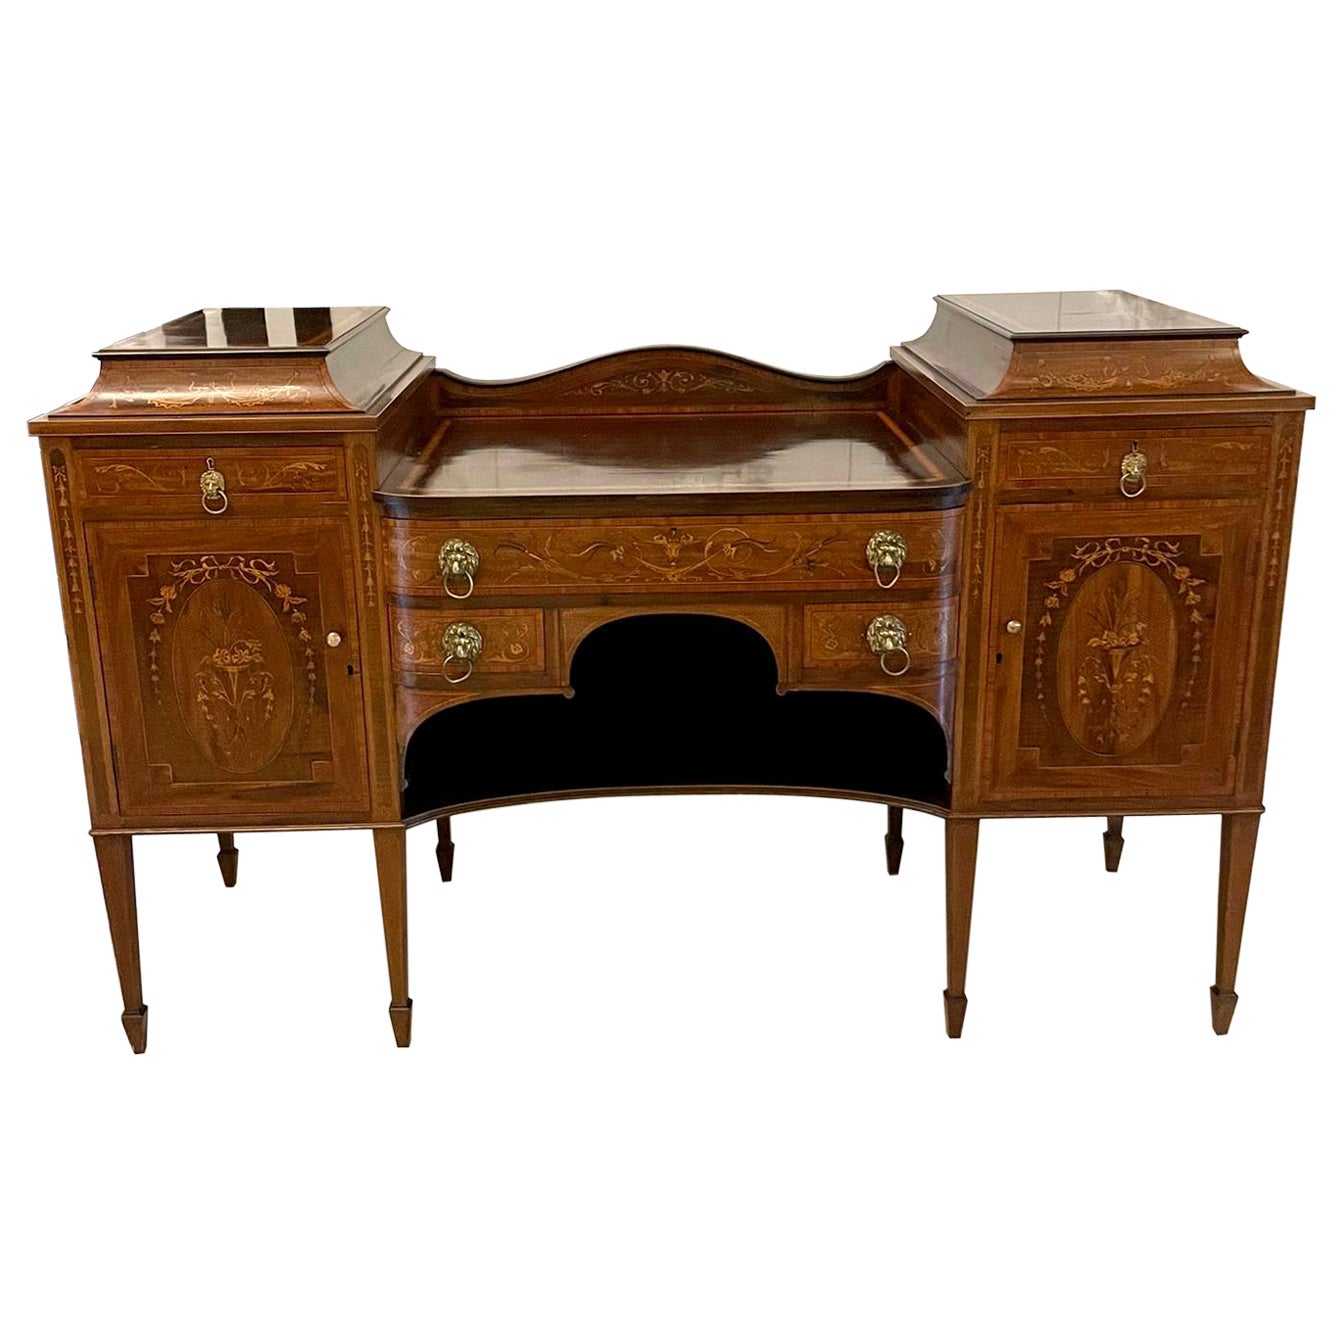 Fine Quality Antique Mahogany Inlaid Marquetry Sideboard By Hewetsons, London